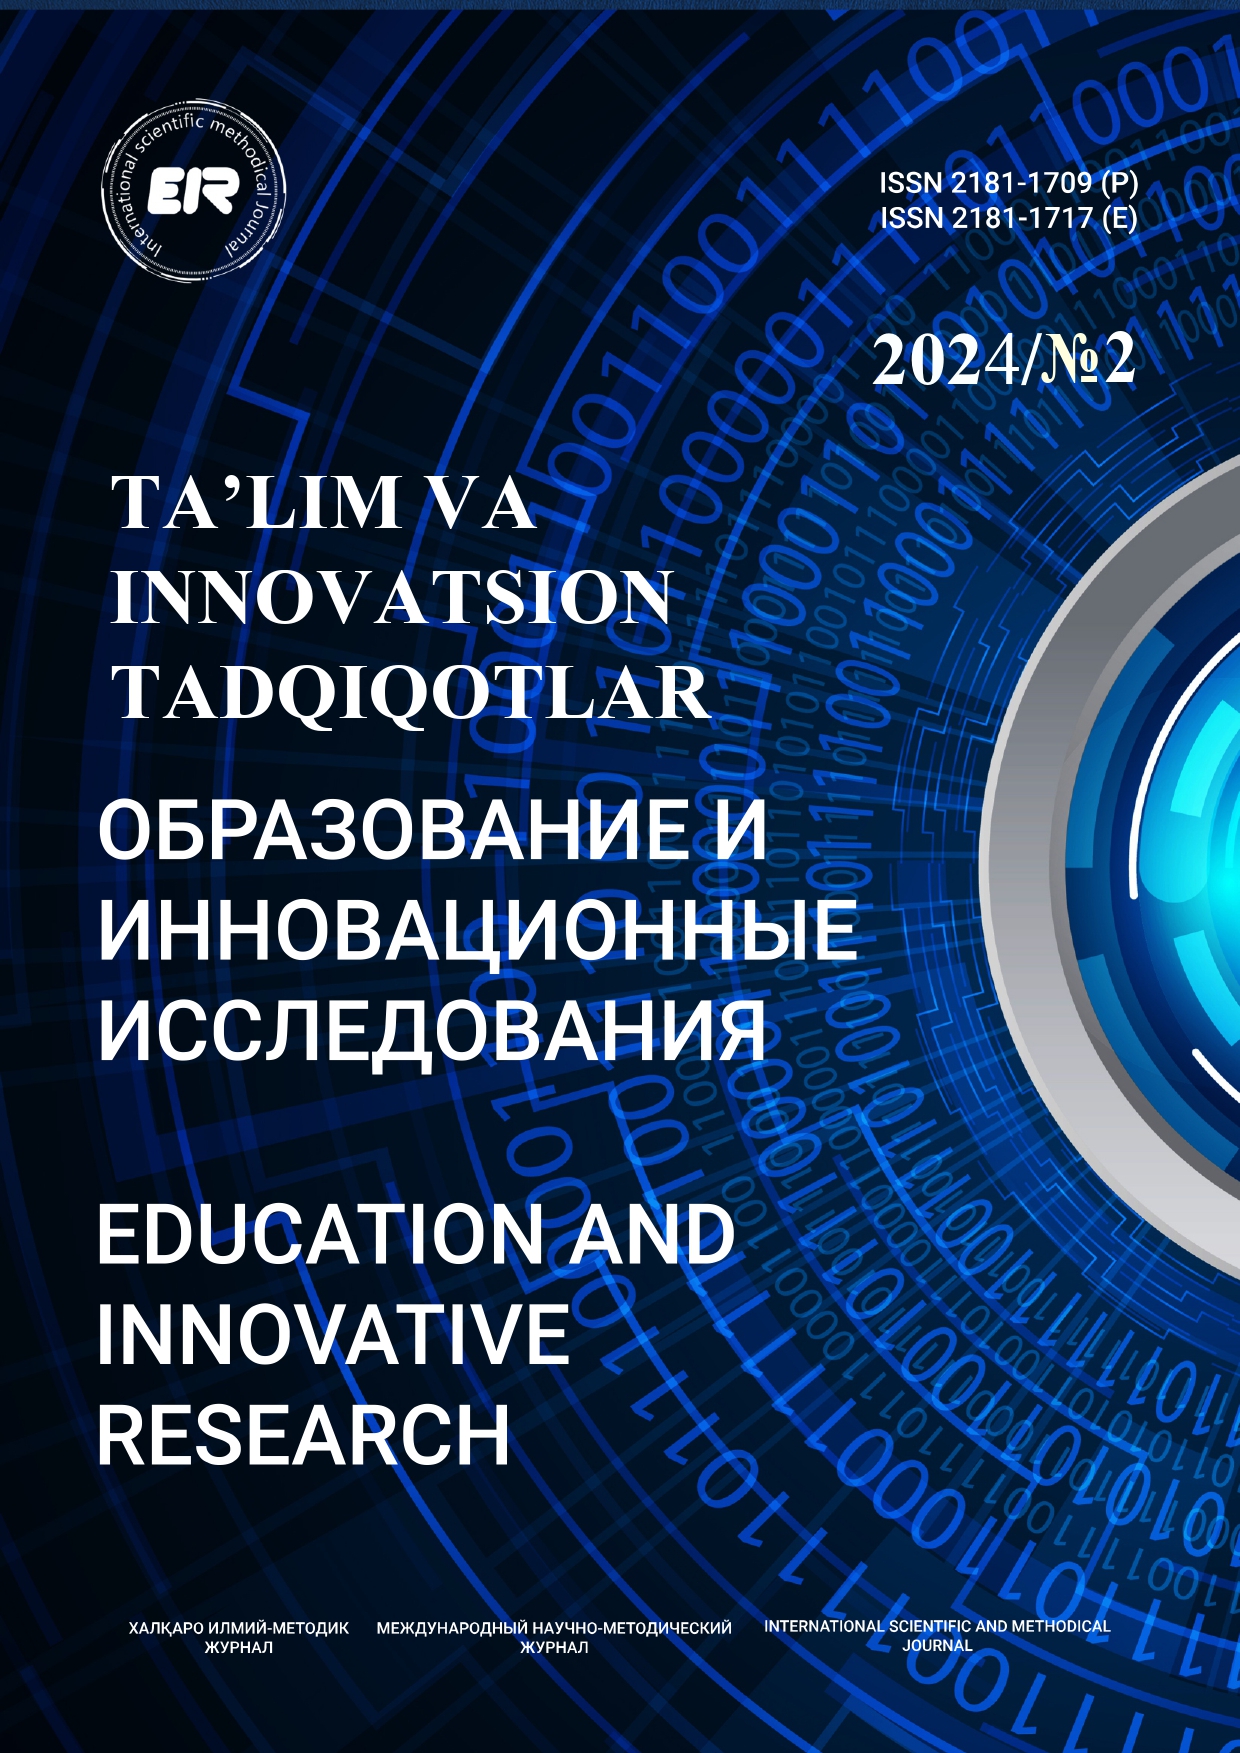 					View No. 2 (2024): Education and innovative research
				